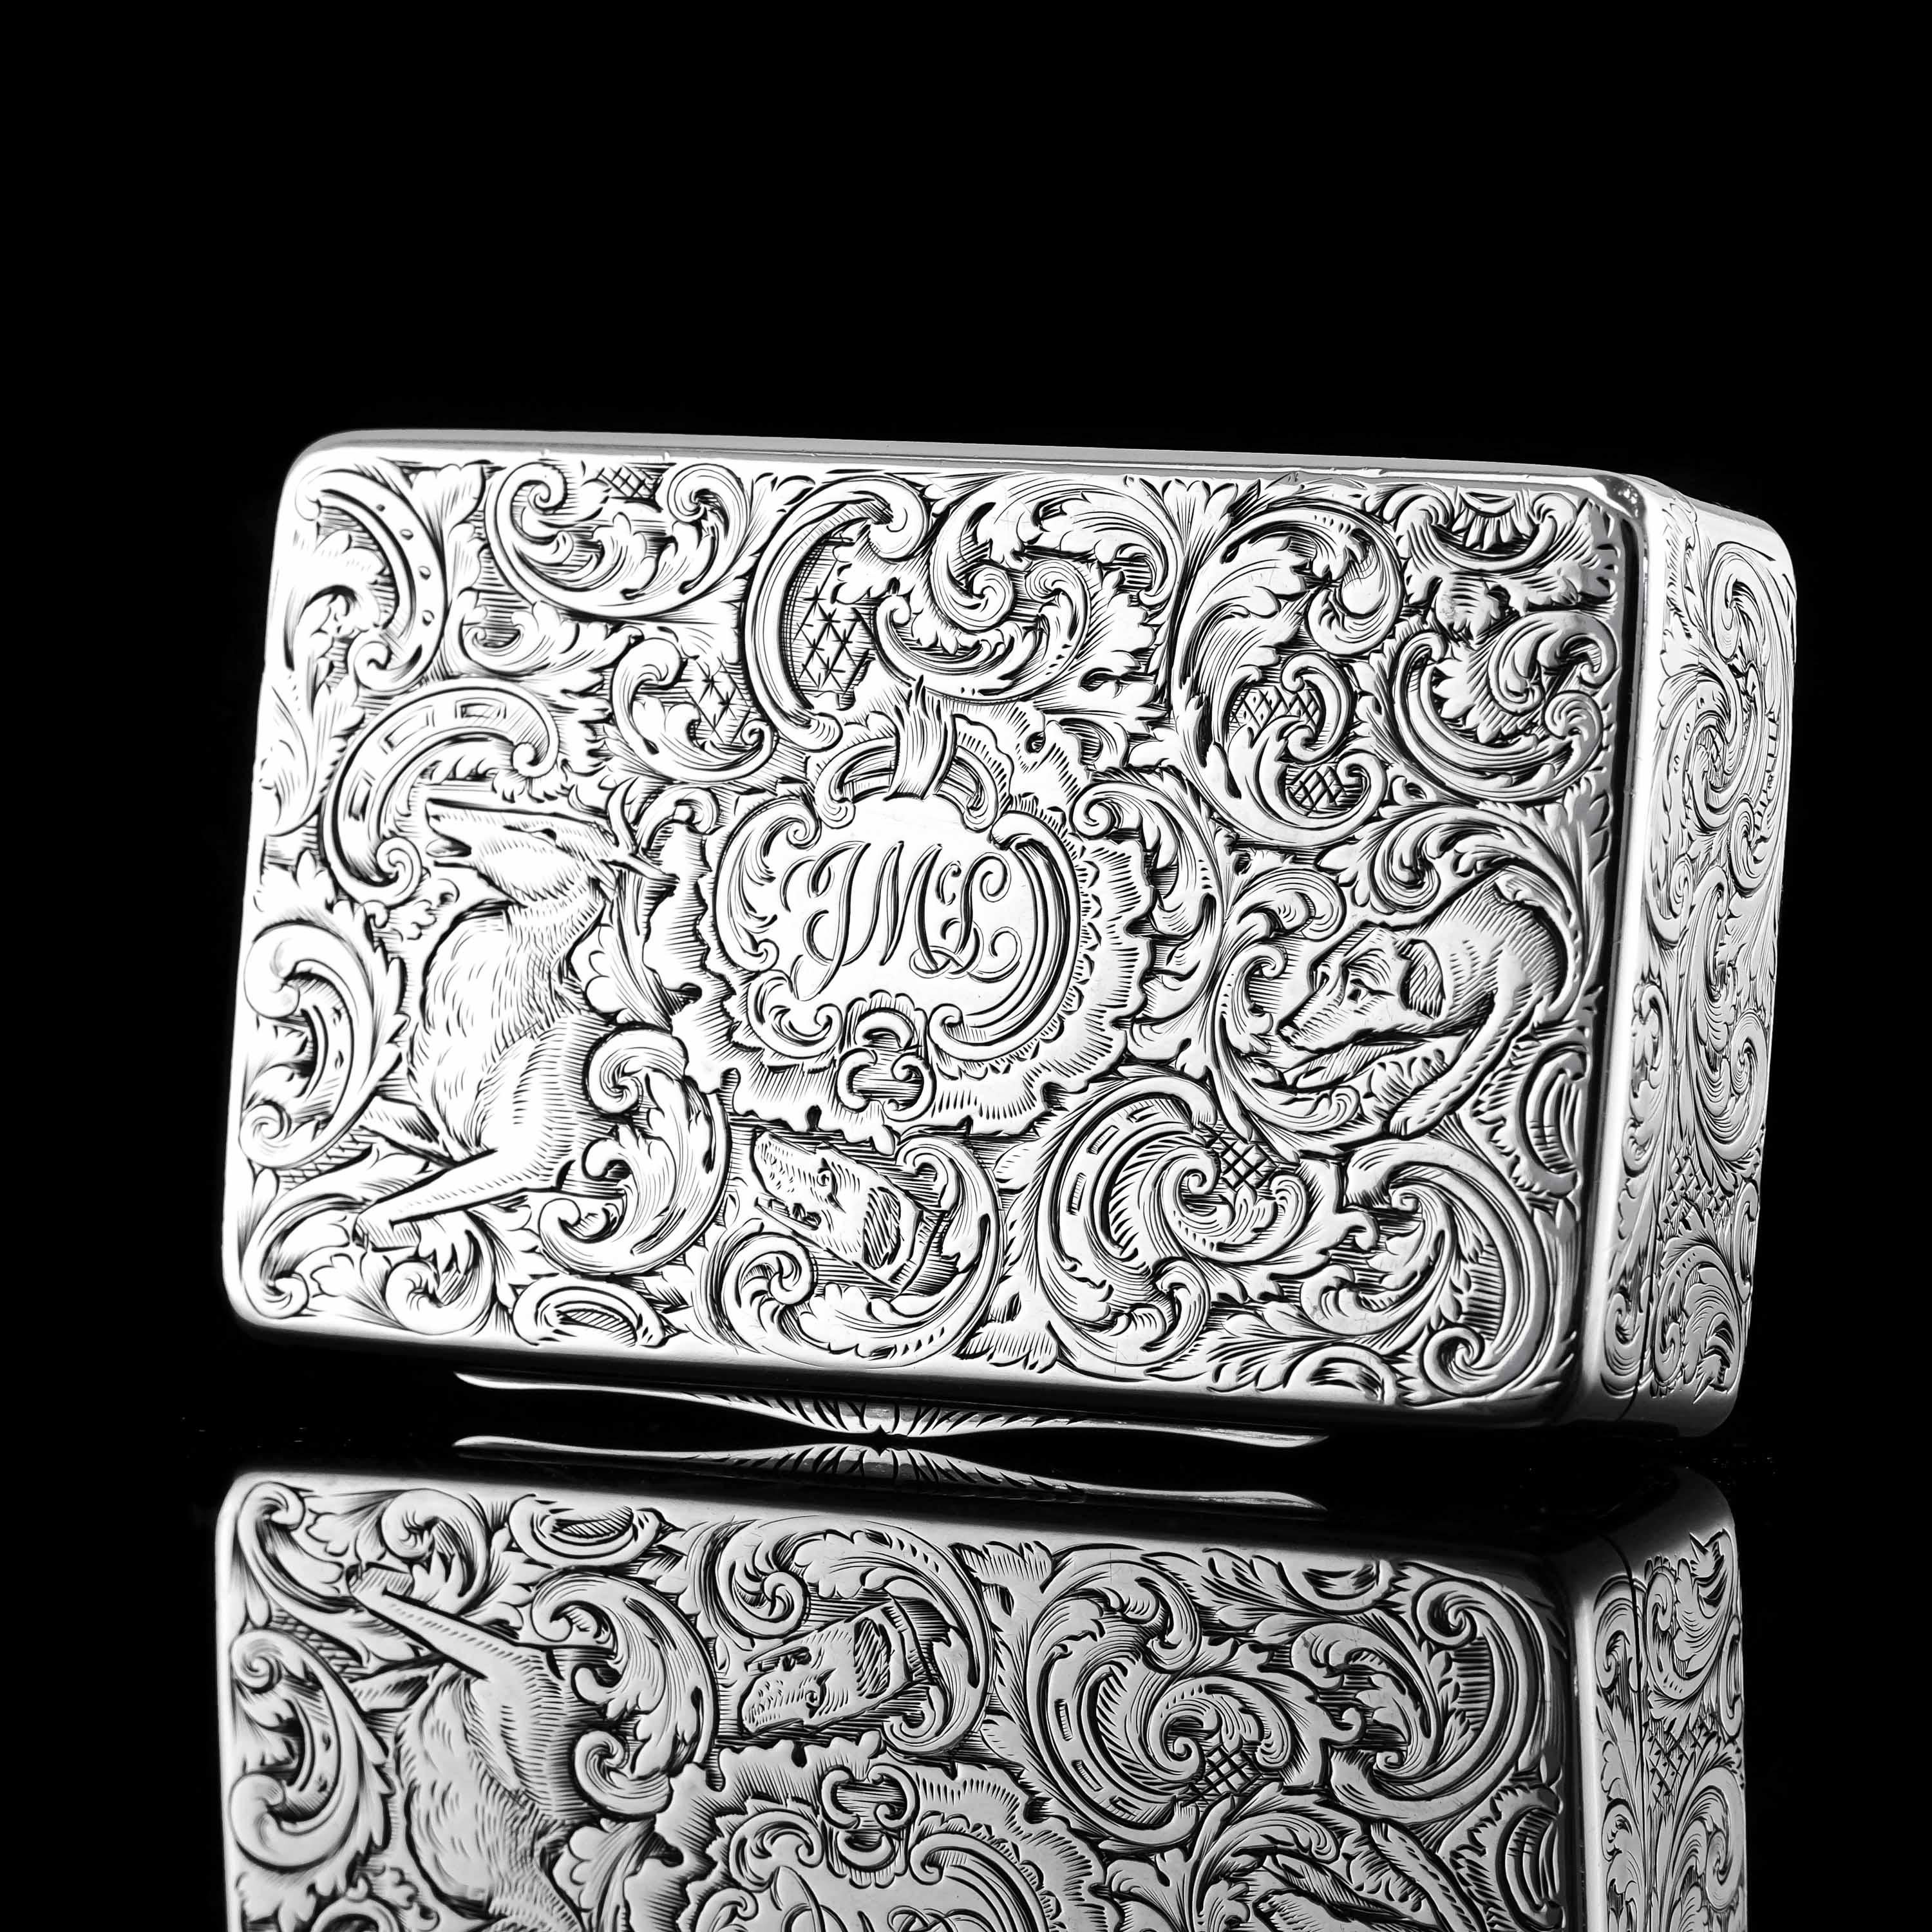 We are delighted to offer this Victorian solid silver snuff box with the maker's mark of Charles Rawlings & William Summers, London 1837.
 
Whilst the box's shape and initial geometric design by itself may not be of distinction, it is undeniably the